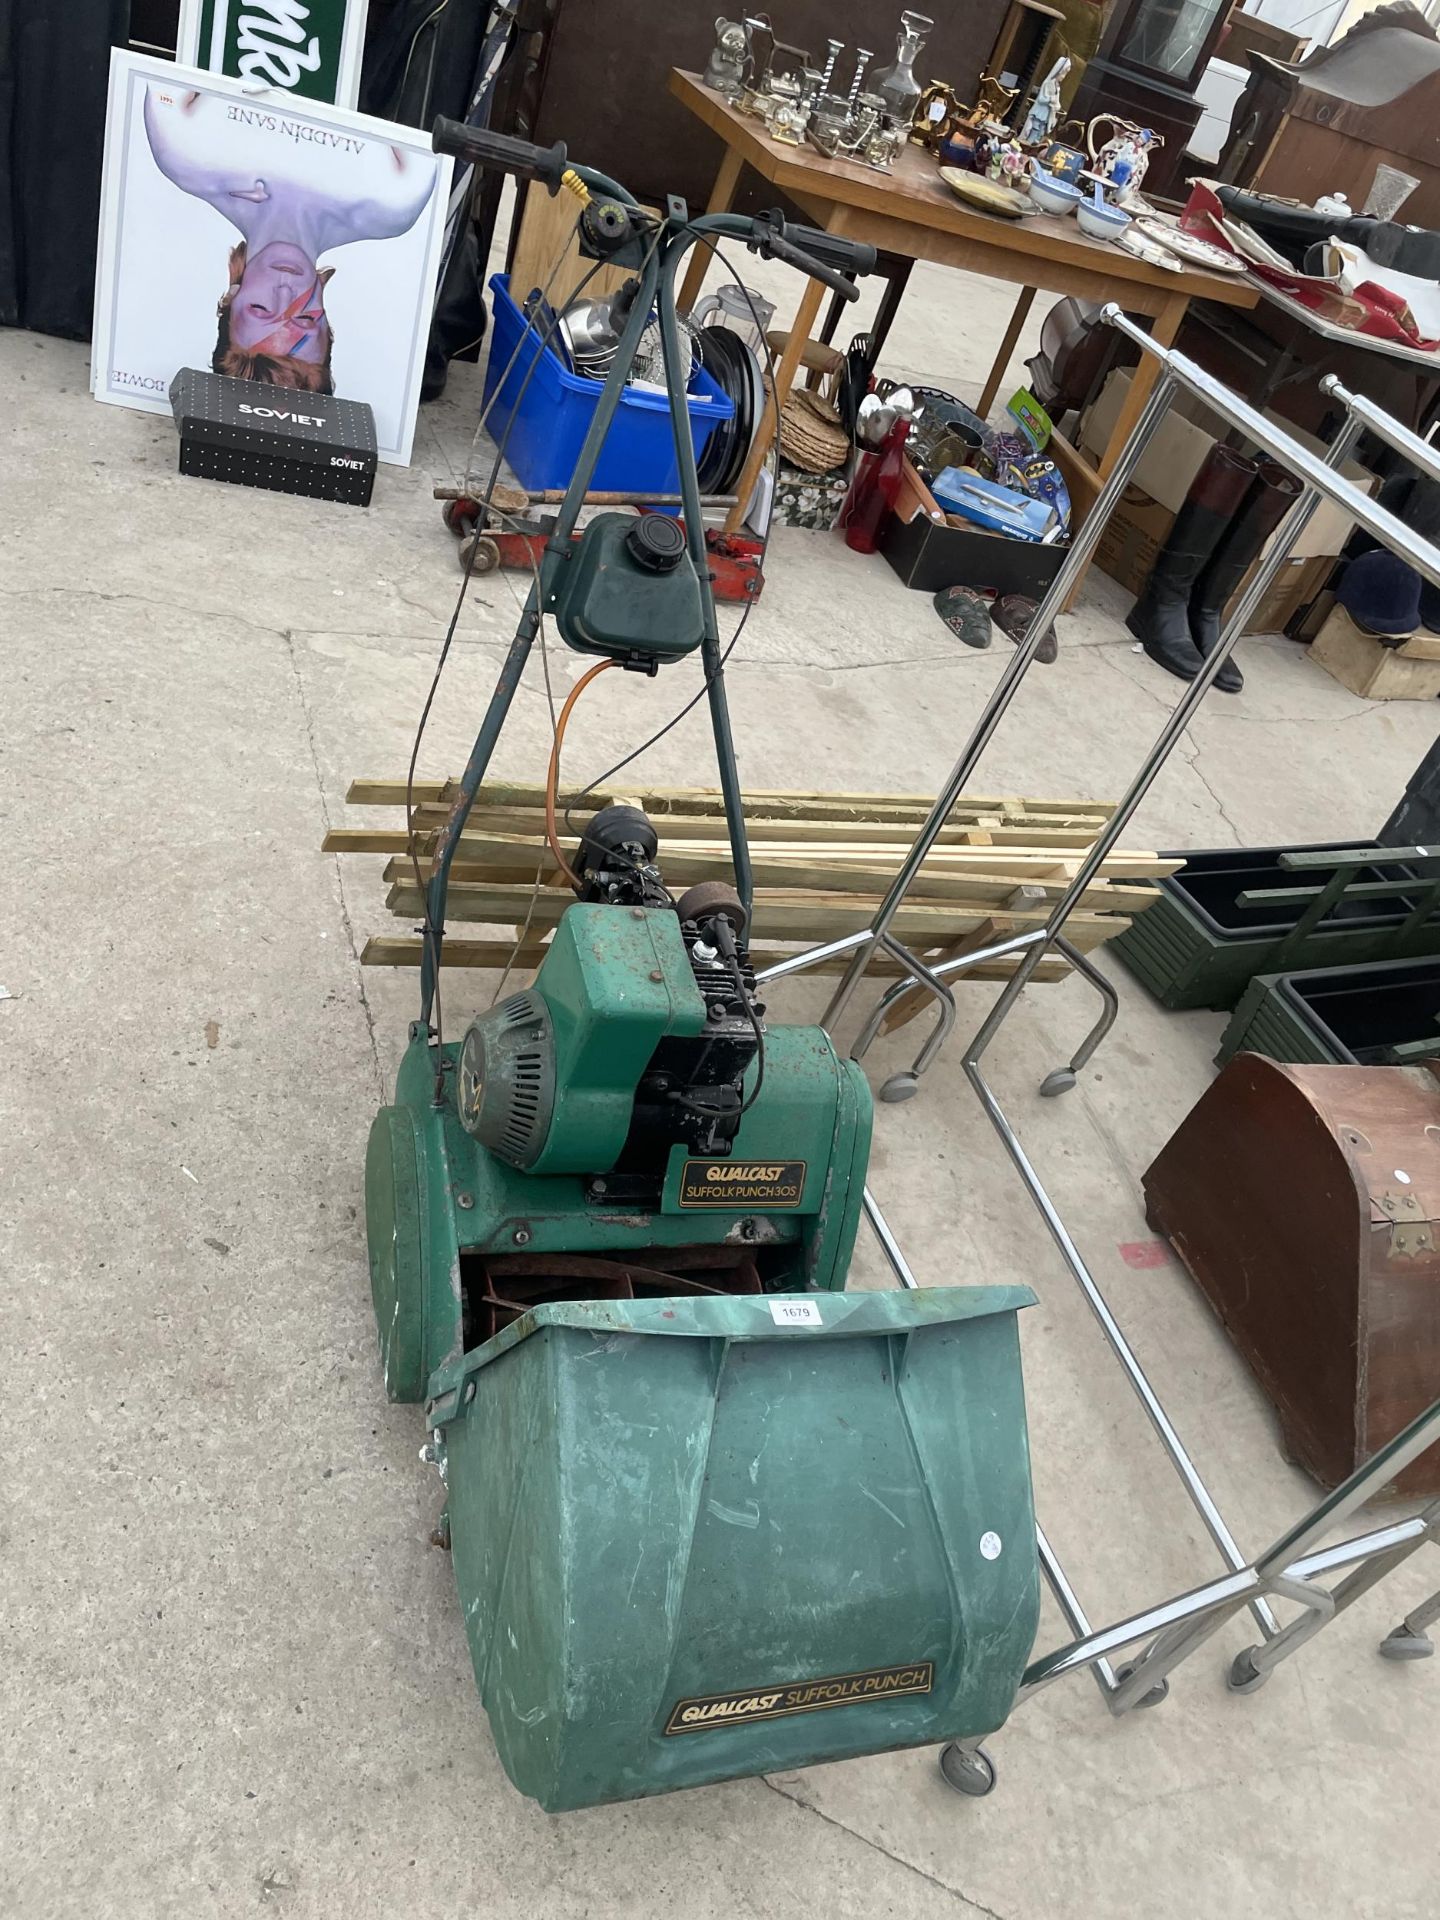 A VINTAGE PETROL ENGIUNE QUALCAST SUFFOLK PUNCH 30S LAWN MOWER WITH GRASS BOX